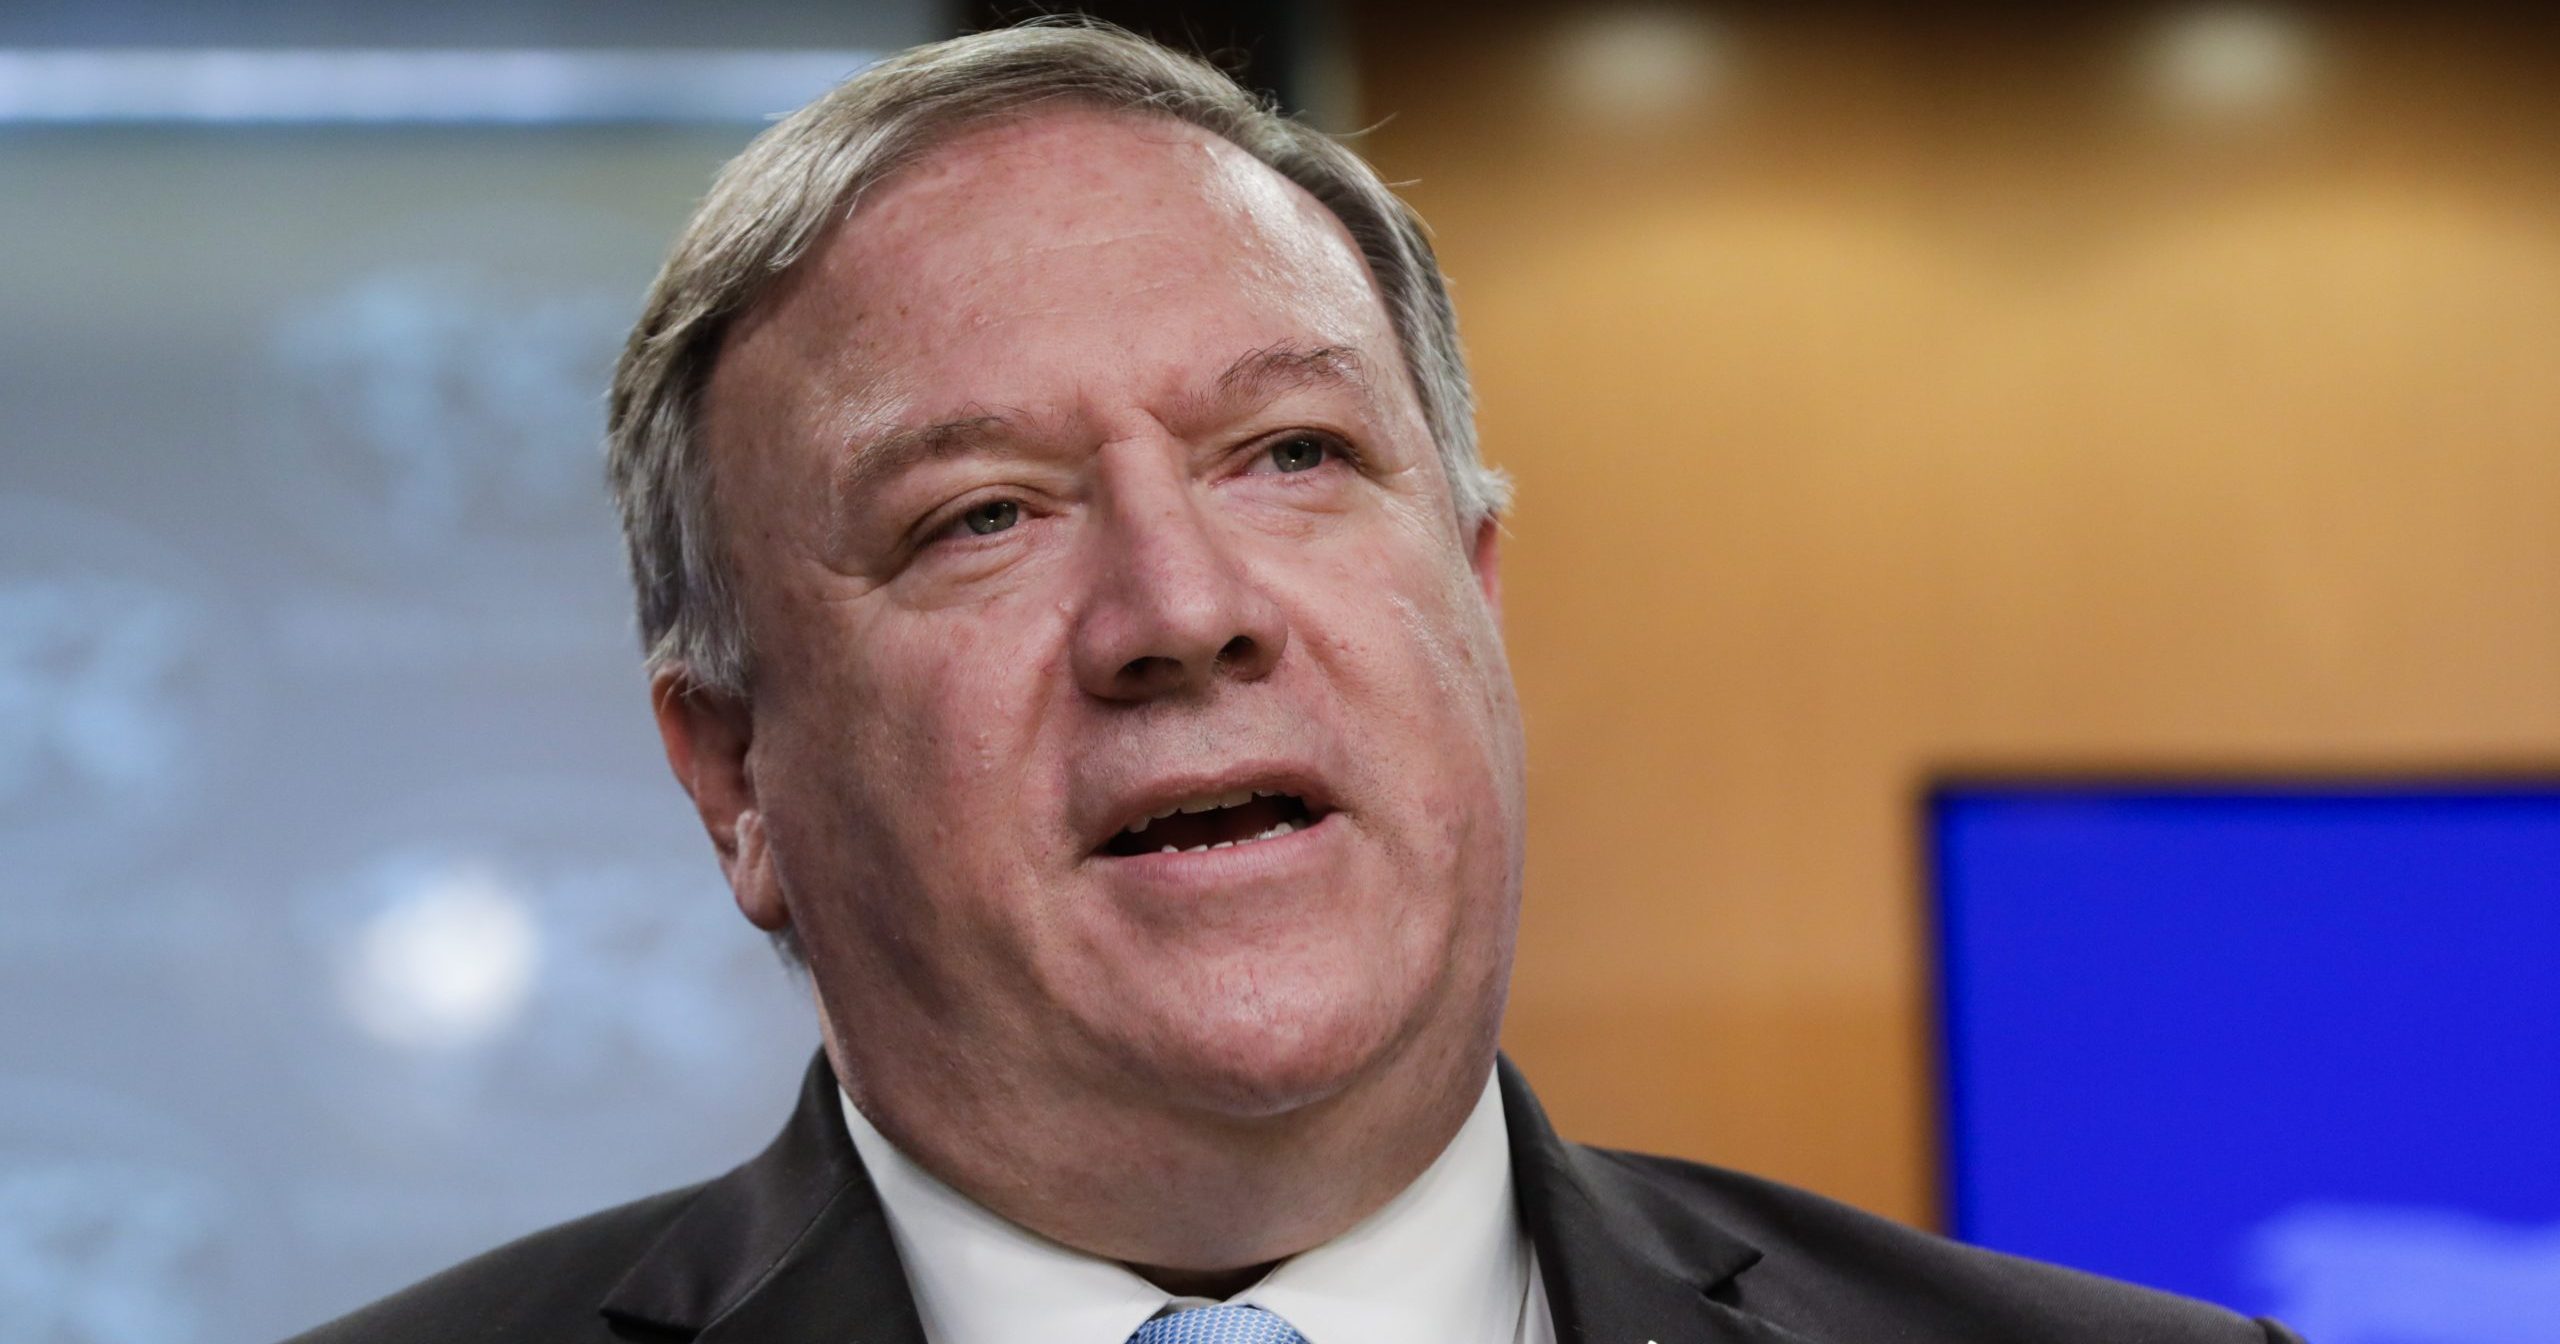 In this June 11, 2020, file photo, Secretary of State Mike Pompeo speaks at the State Department in Washington. The Trump administration is dialing up pressure on Syrian Presideny Bashar Assad and his inner circle with new economic and travel sanctions for human rights abuses.